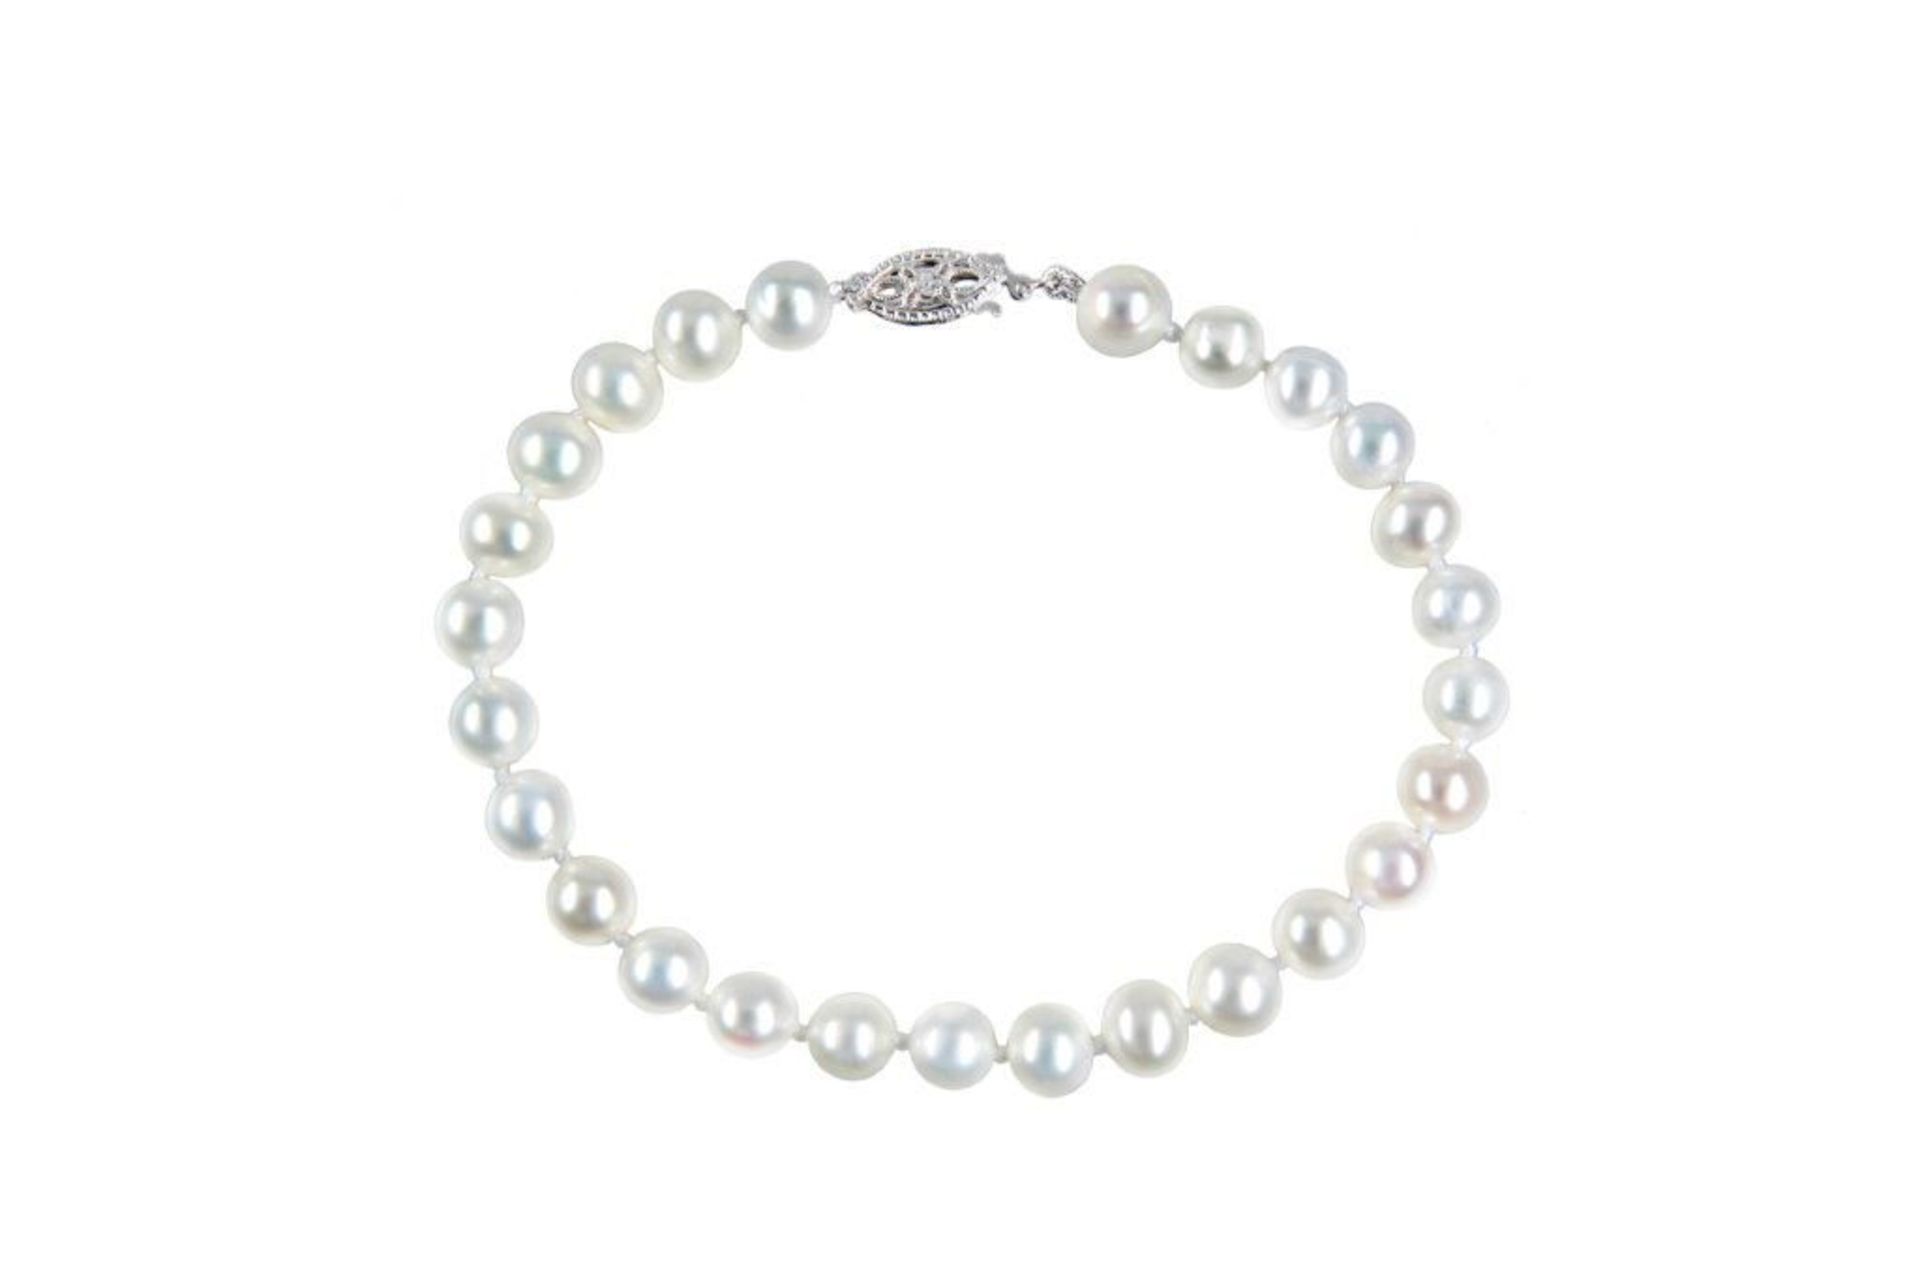 6-7mm Pearl Bracelet with 9ct White Gold Clasp, Metal 9ct white gold, Weight 0.2, RRP £254.99 (